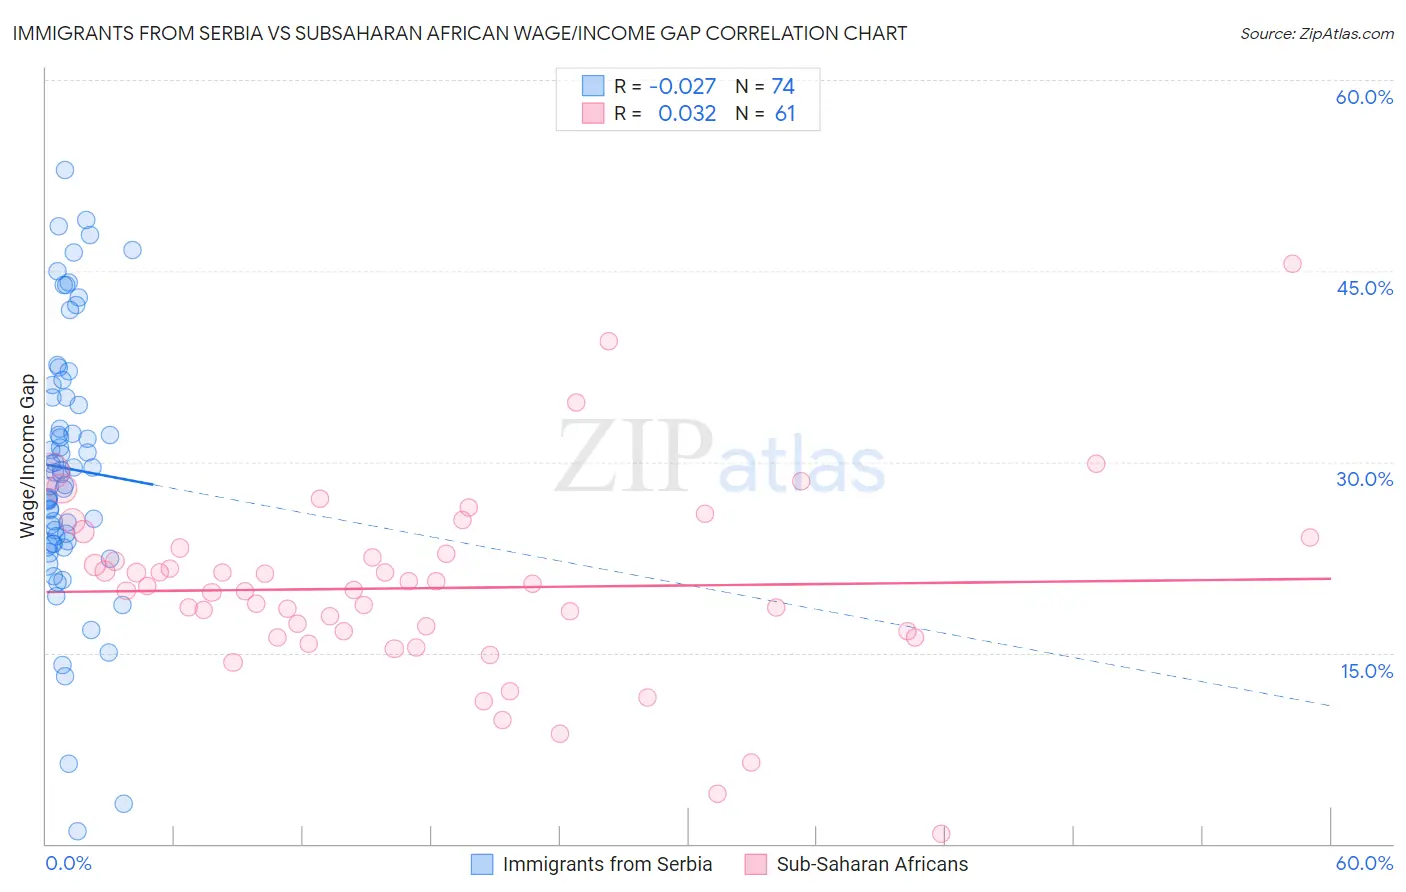 Immigrants from Serbia vs Subsaharan African Wage/Income Gap